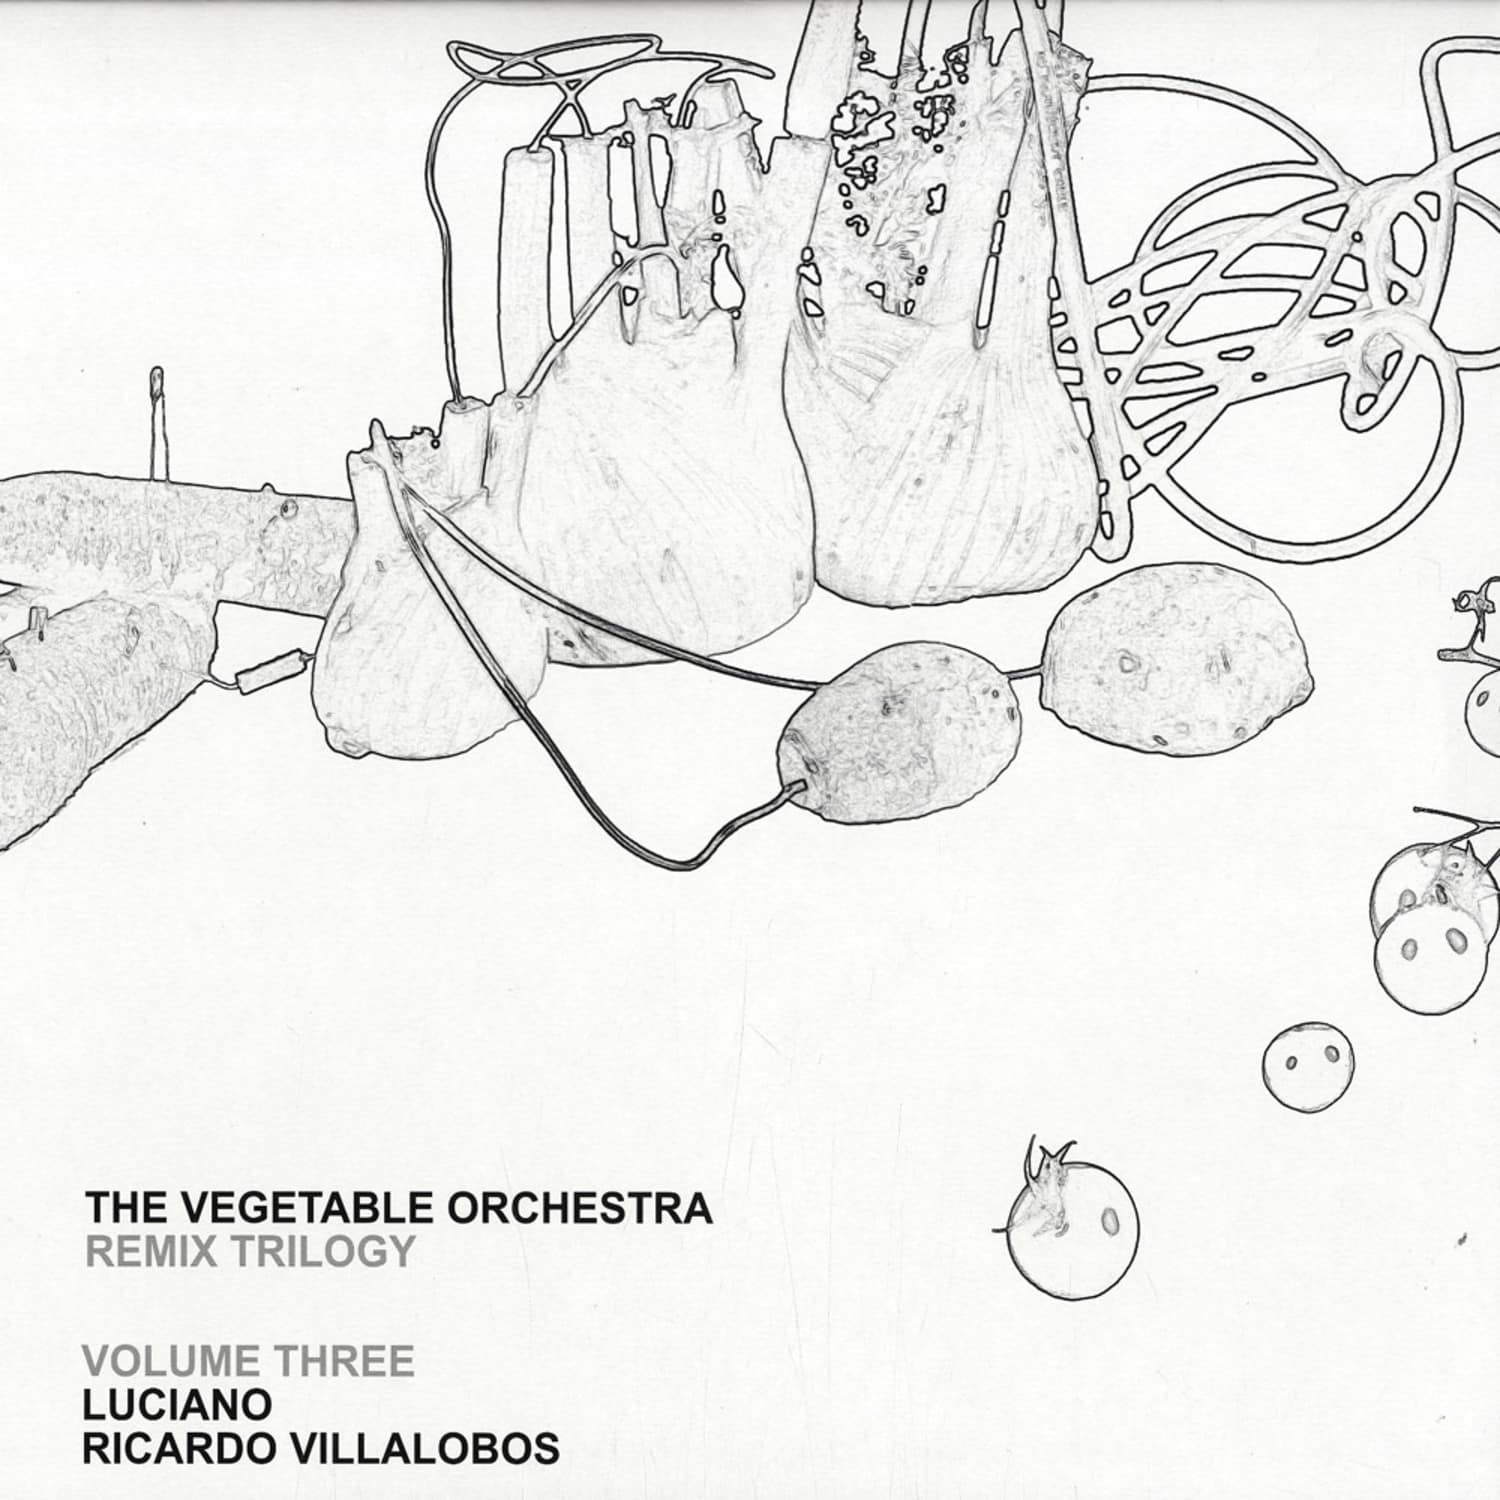 The Vegetable Orchestra - REMIX TRIOLOGY VOL THREE